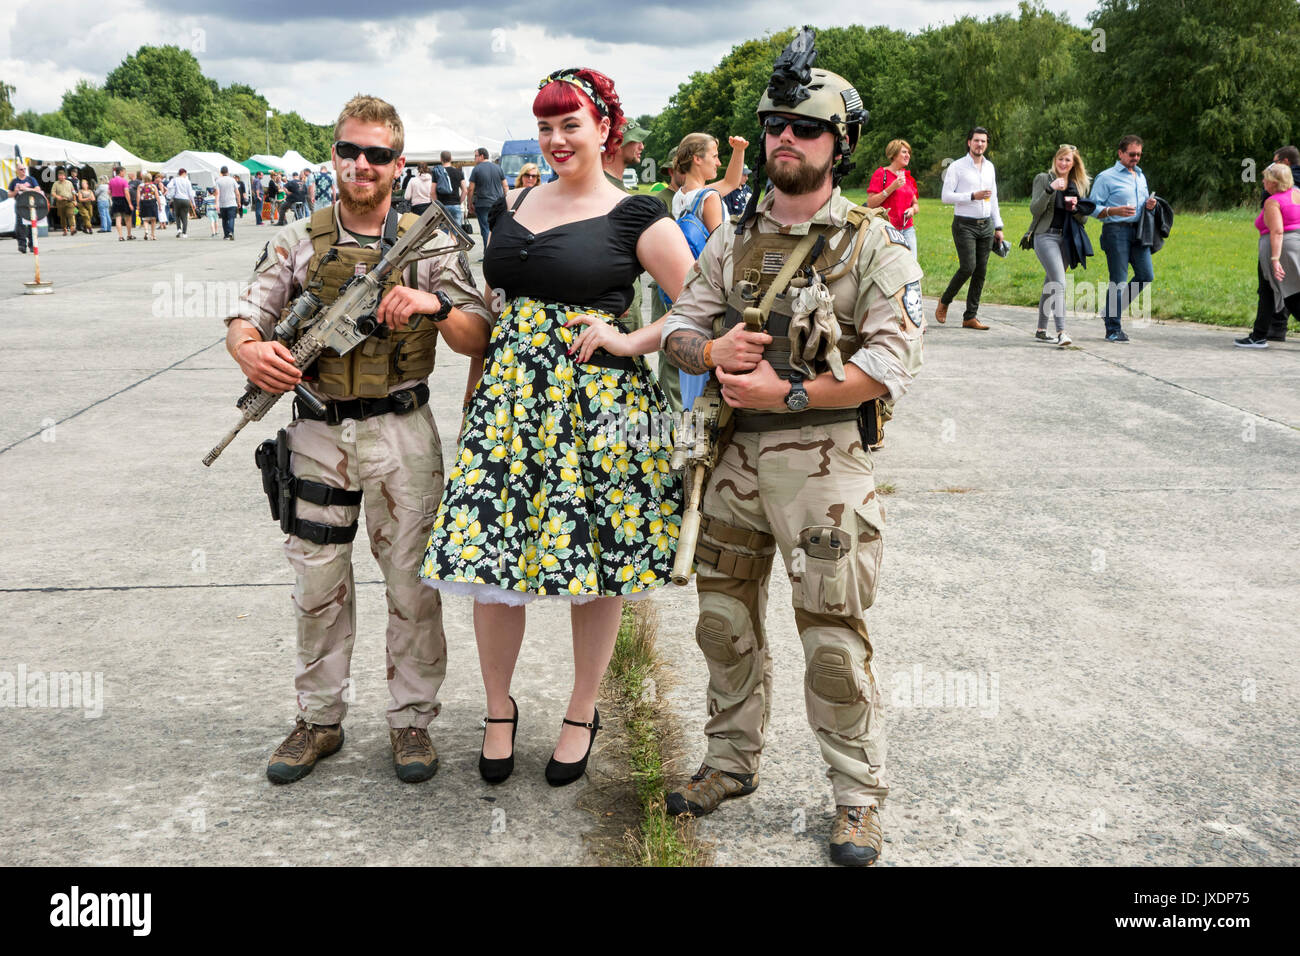 Re-enactors dressed as modern soldiers in 21th century military uniforms posing with woman in dress of the forties during militaria fair Stock Photo